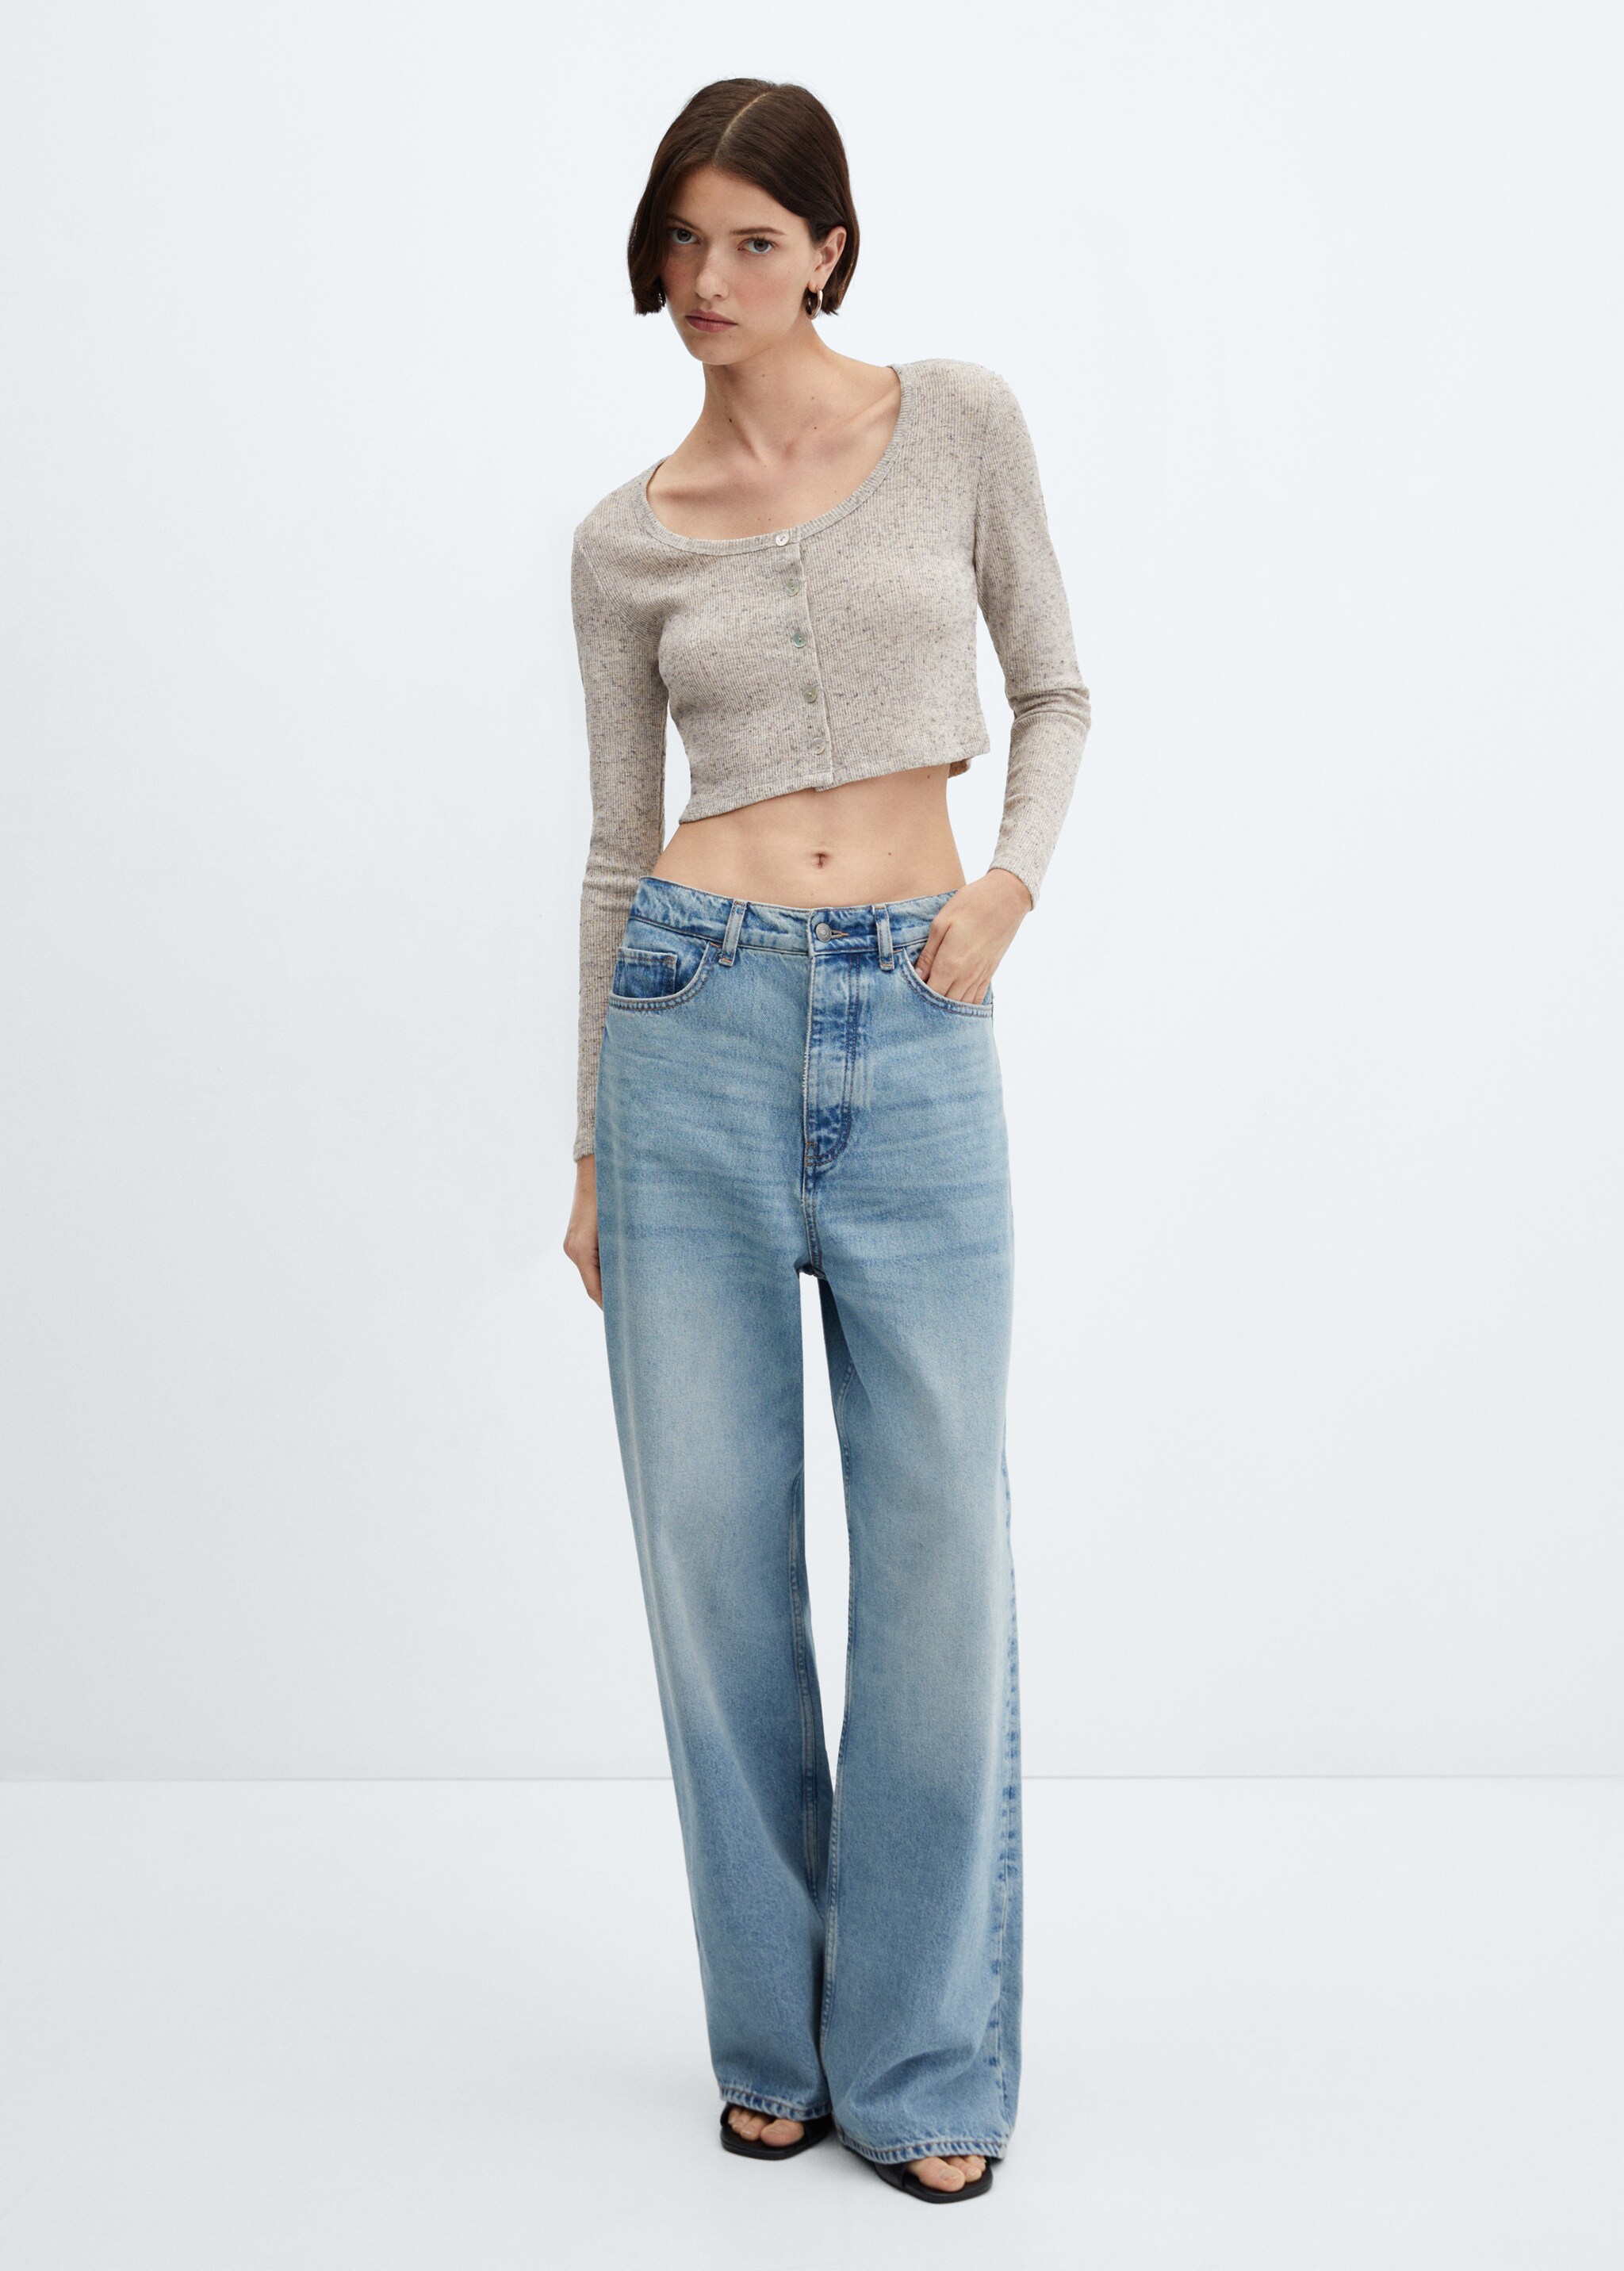 Knitted cropped cardigan - General plane